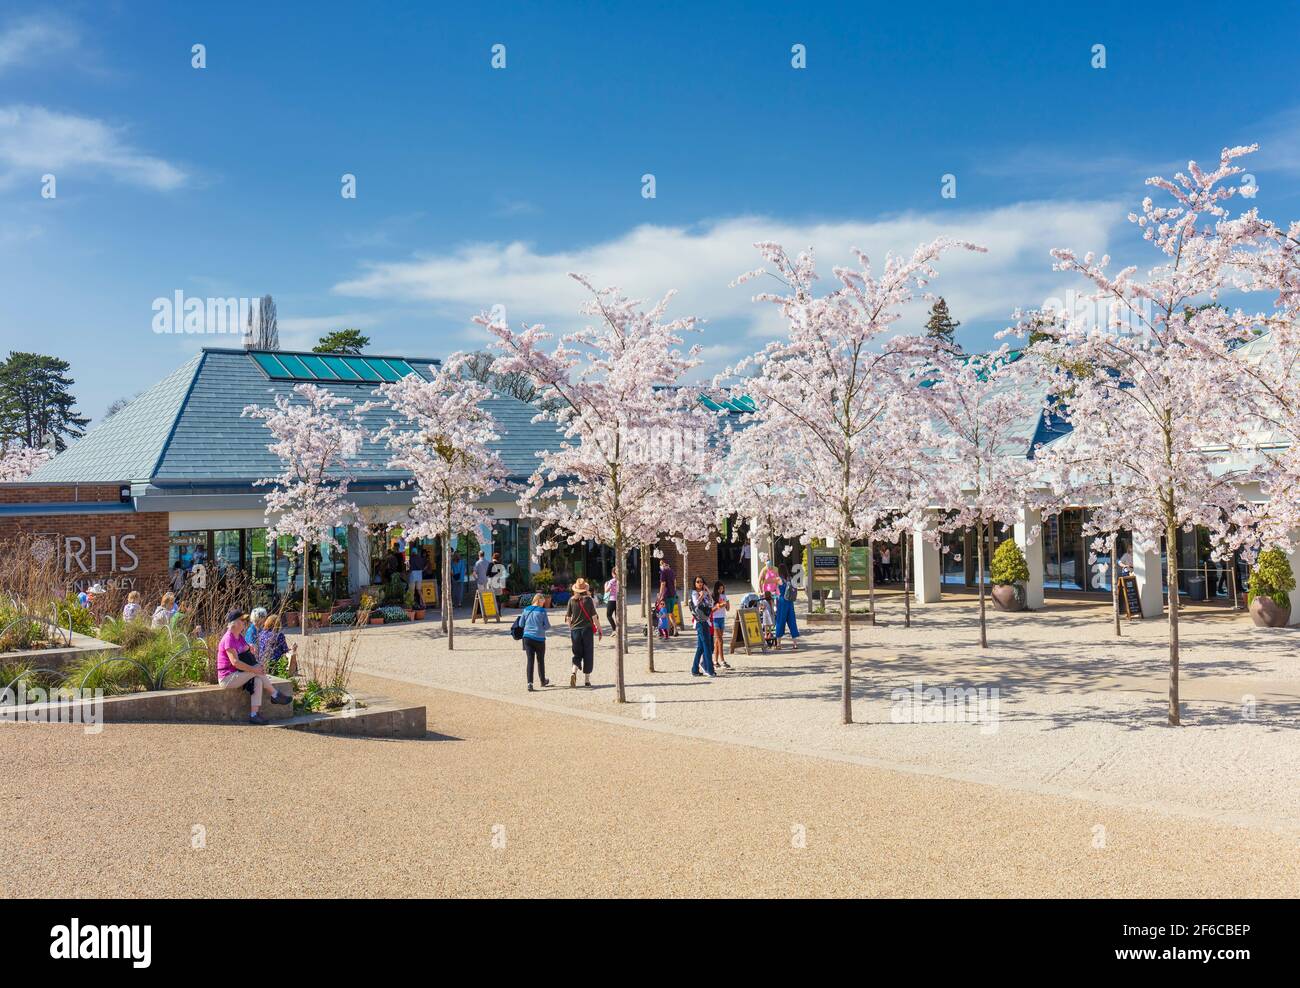 RHS Wisley entrance with cherry blossom trees. Stock Photo